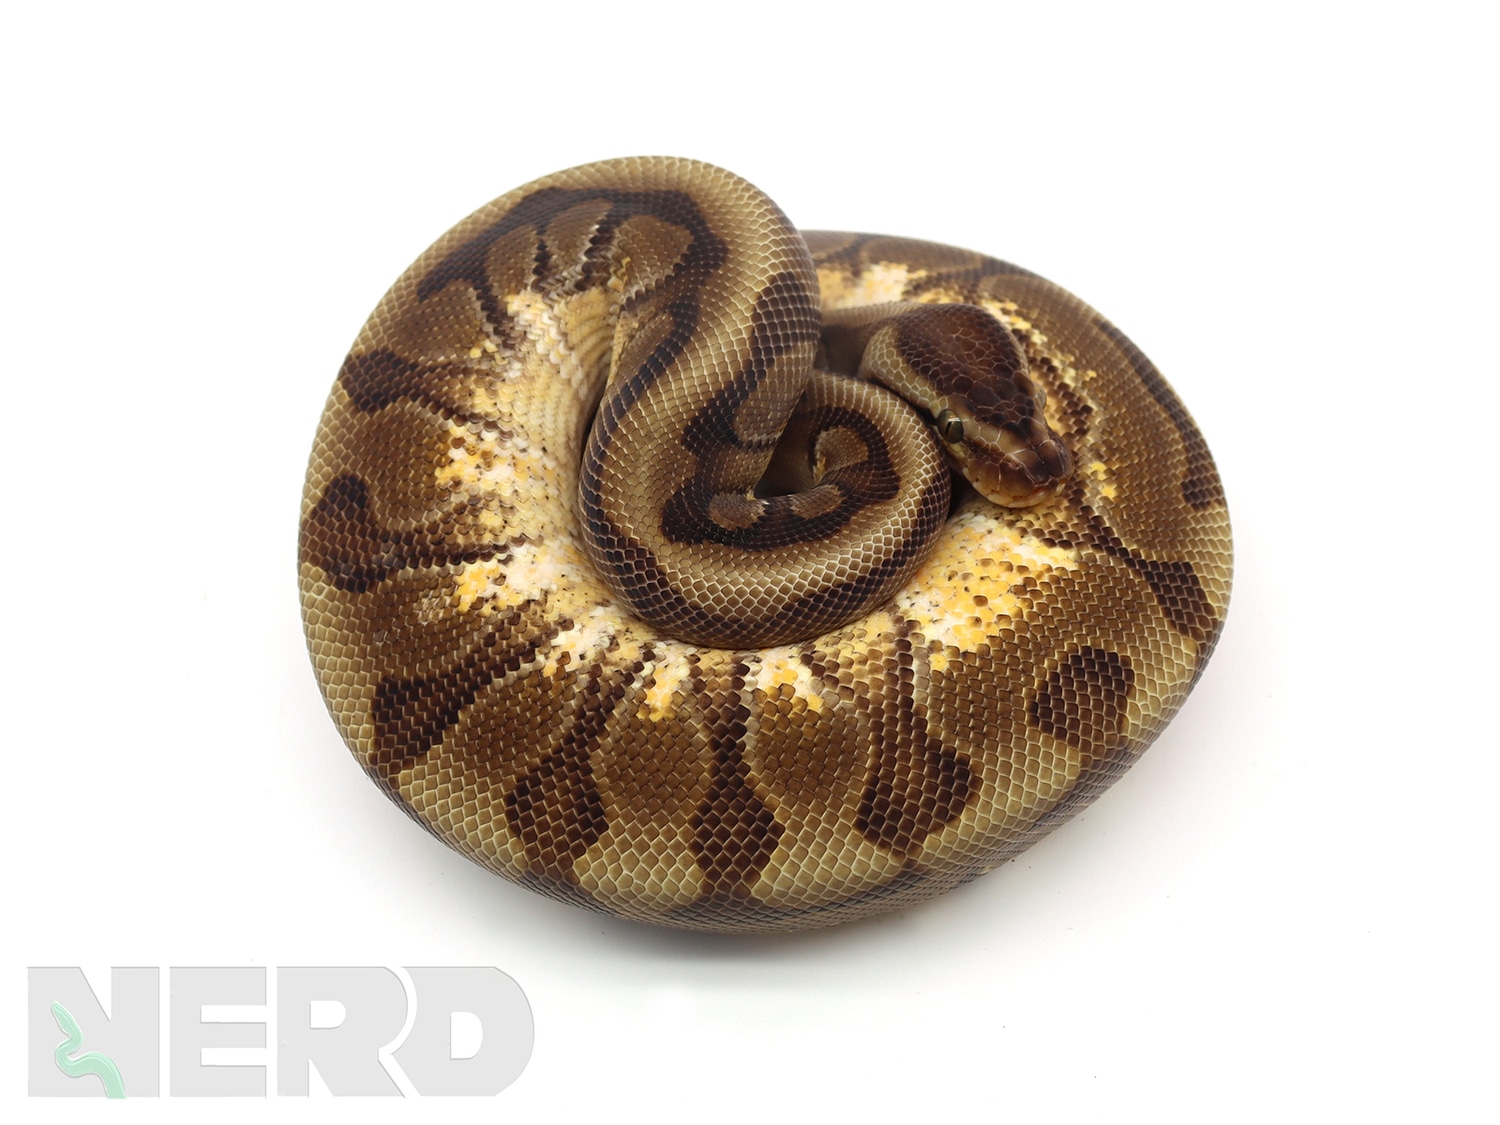 Hidden Gene Woma Enchi Yellowbelly Fader Odium Plus Ball Python by New England Reptile Distributors